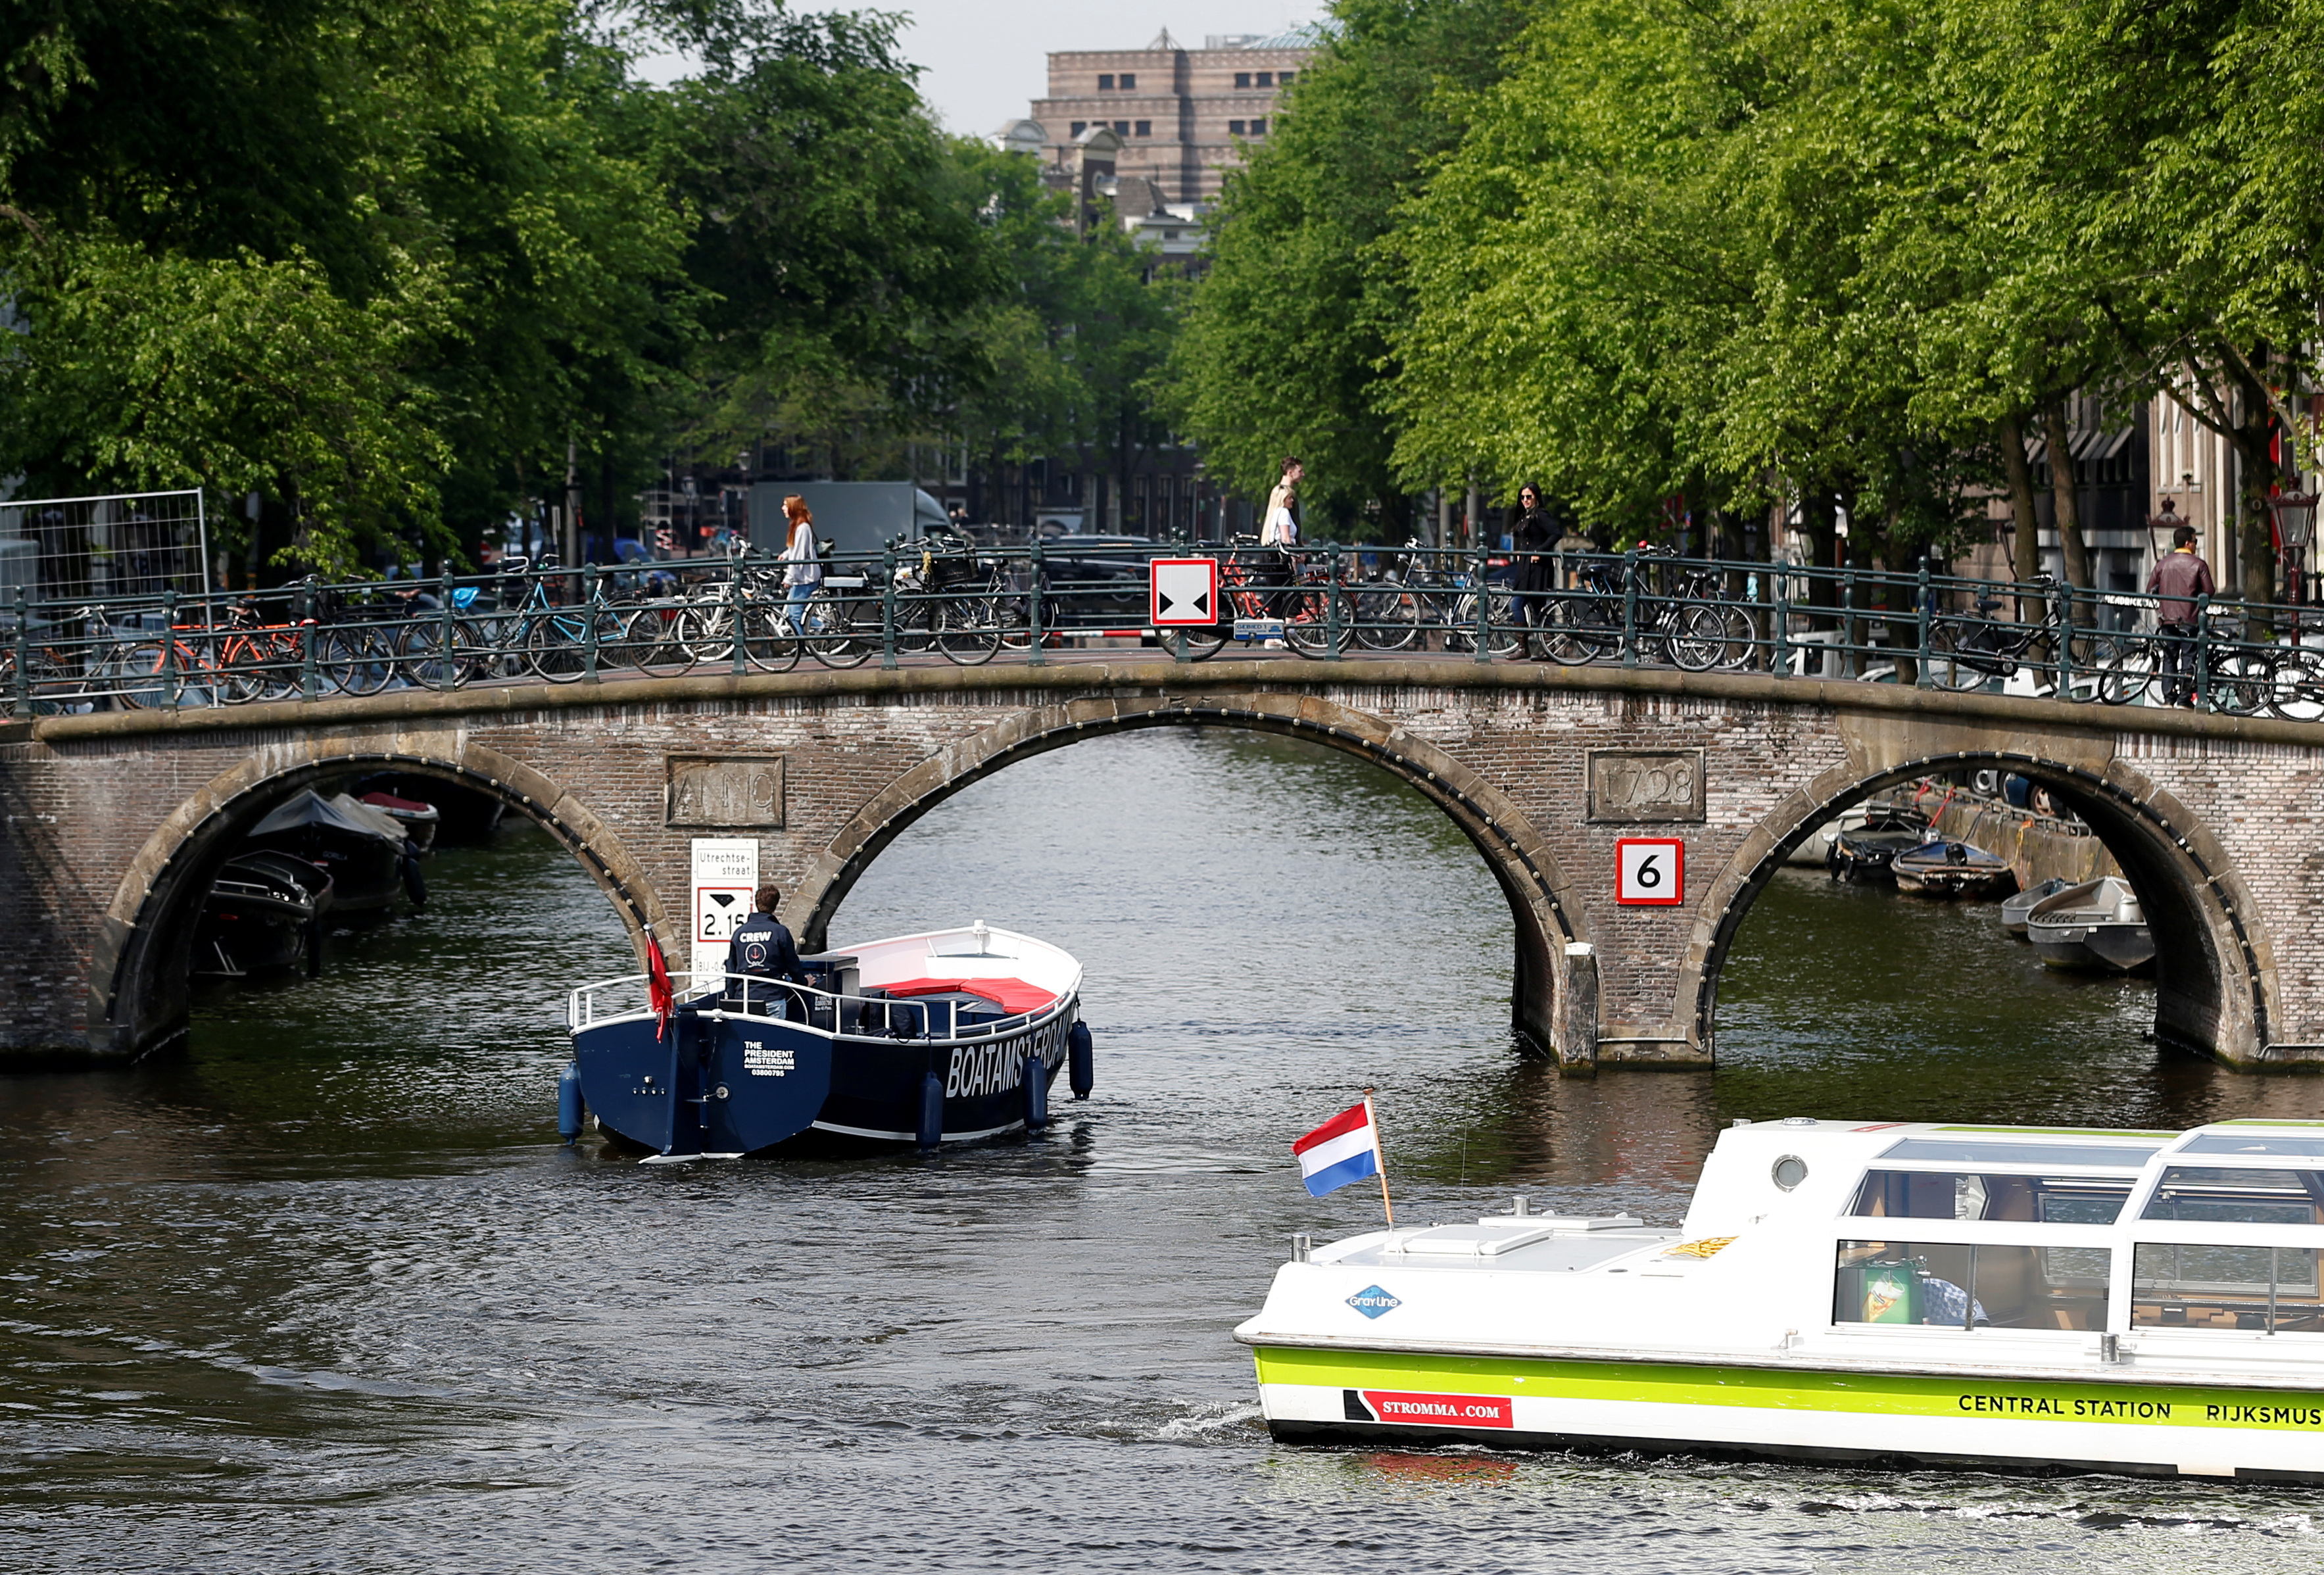 Tourists boats pass on a canal in Amsterdam